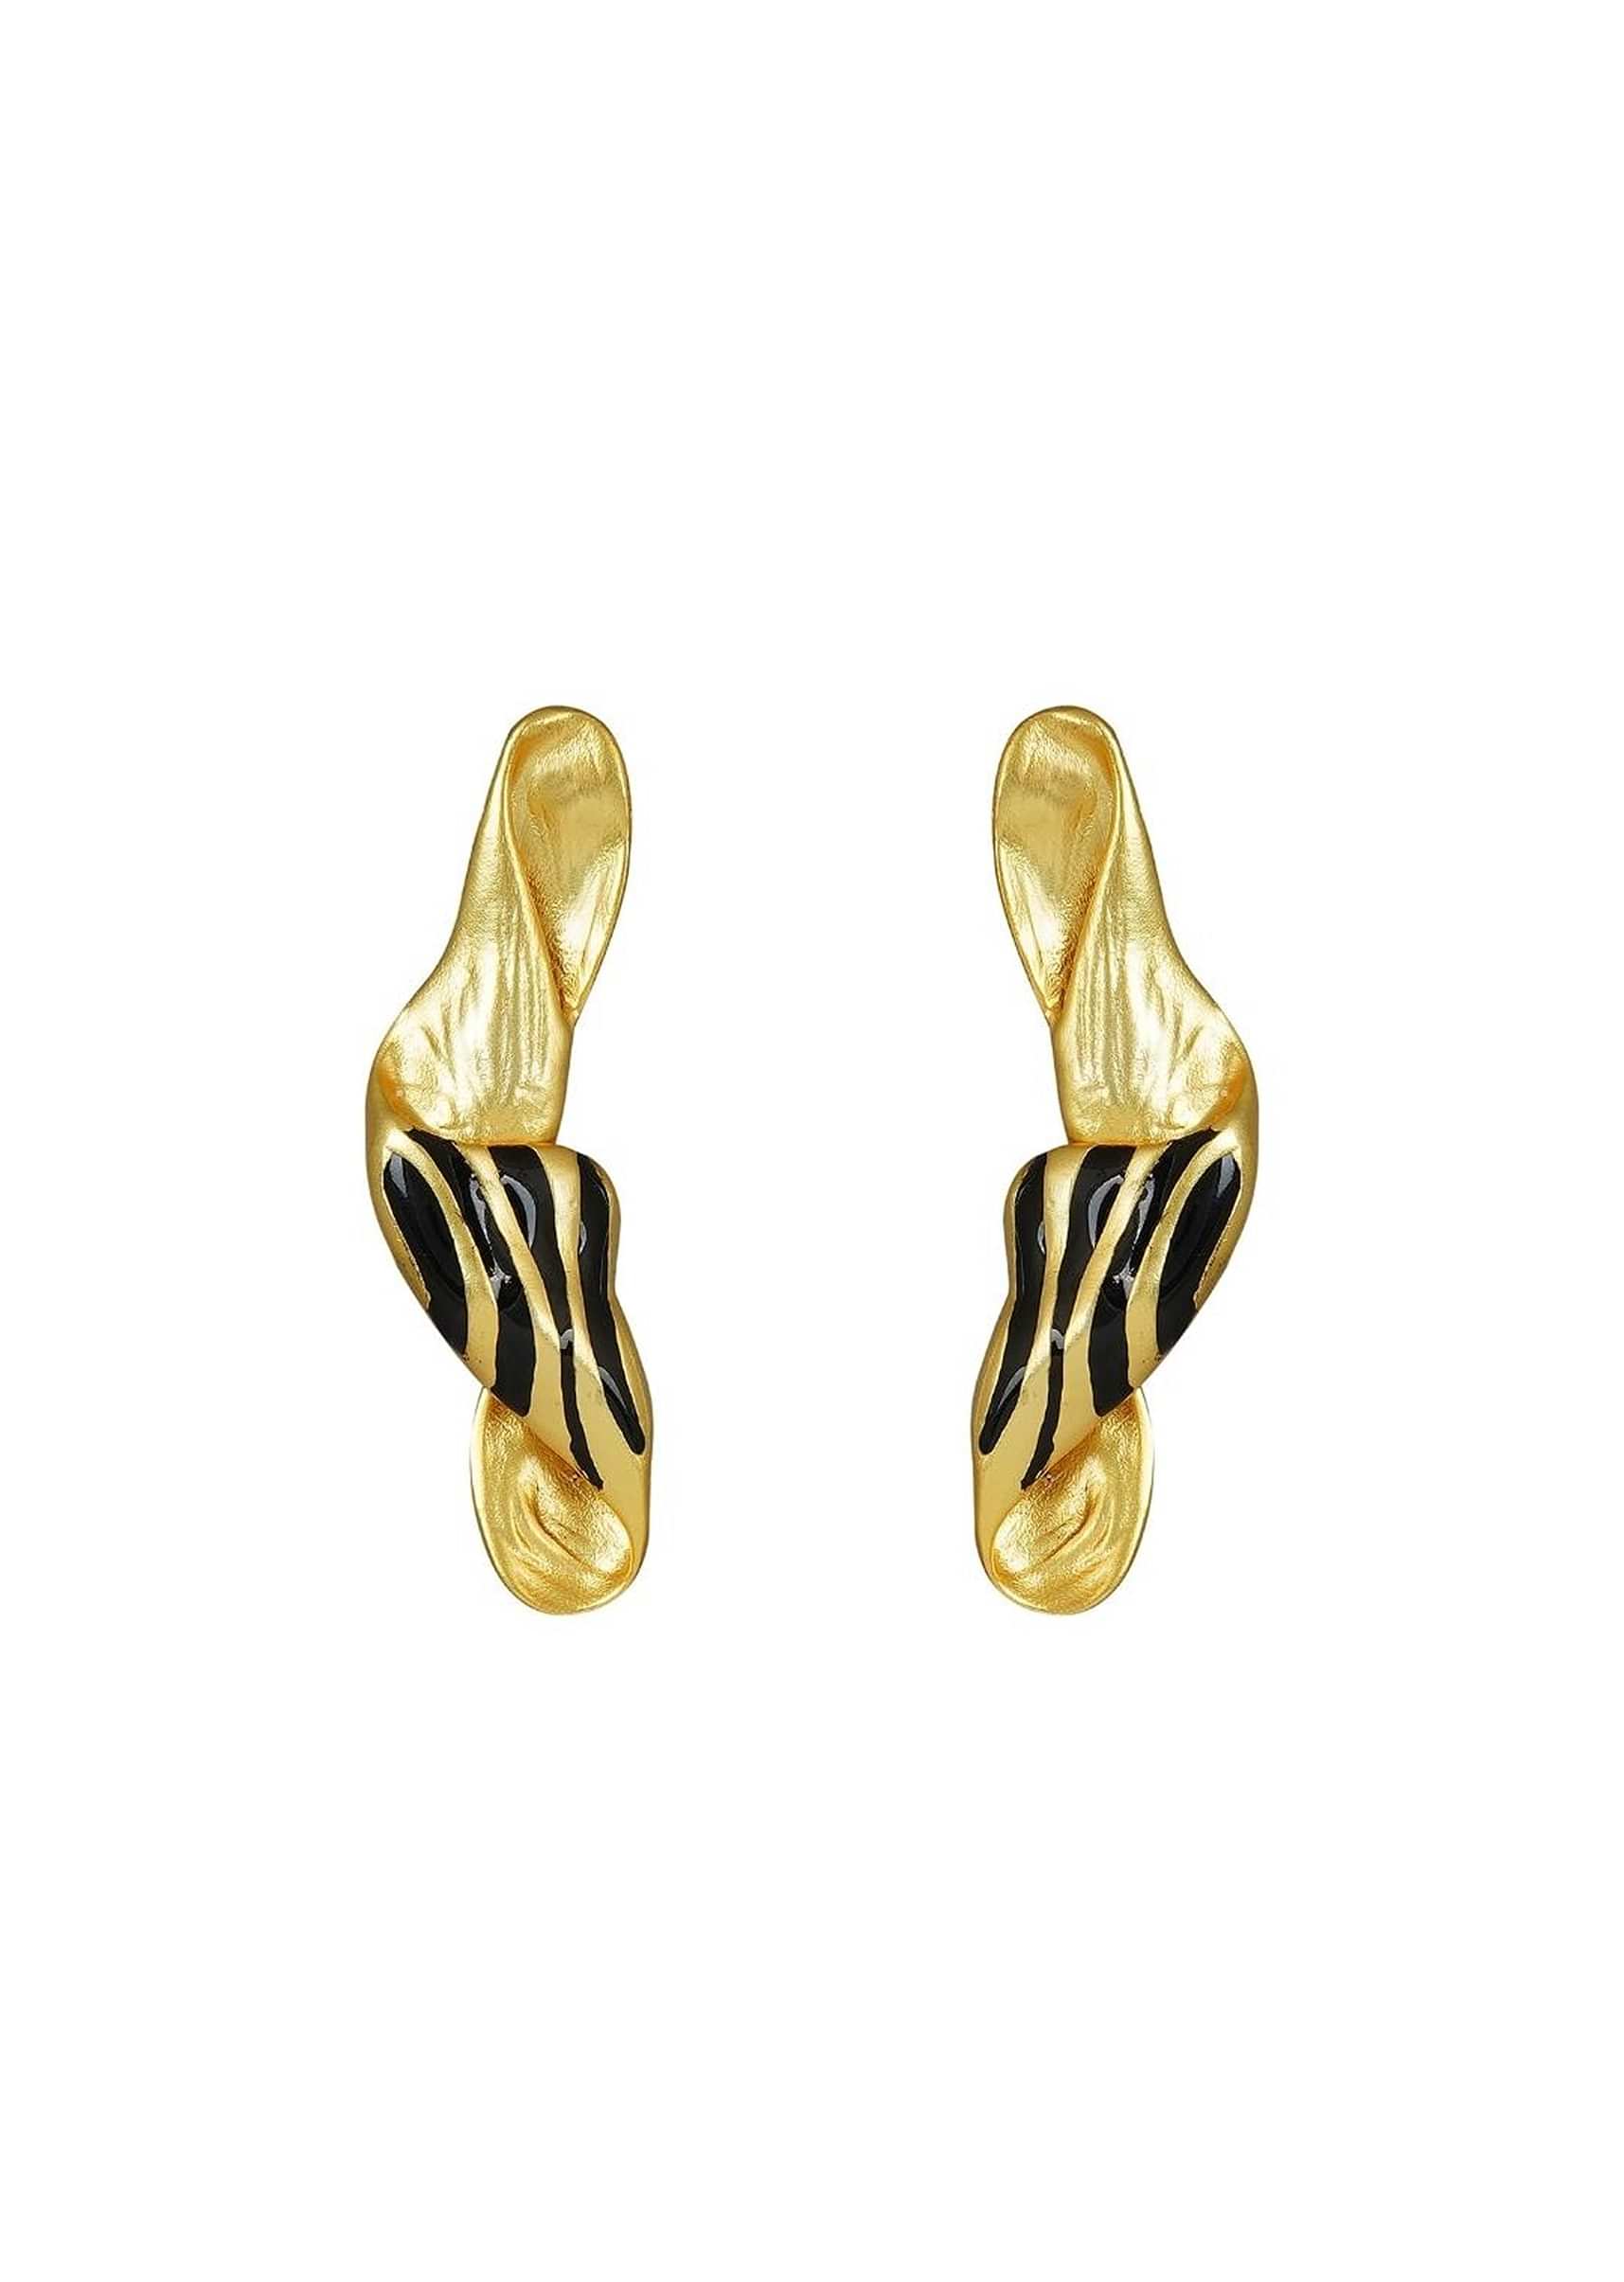 22k Gold Plated Moods Of Nature Statement Stud Earrings